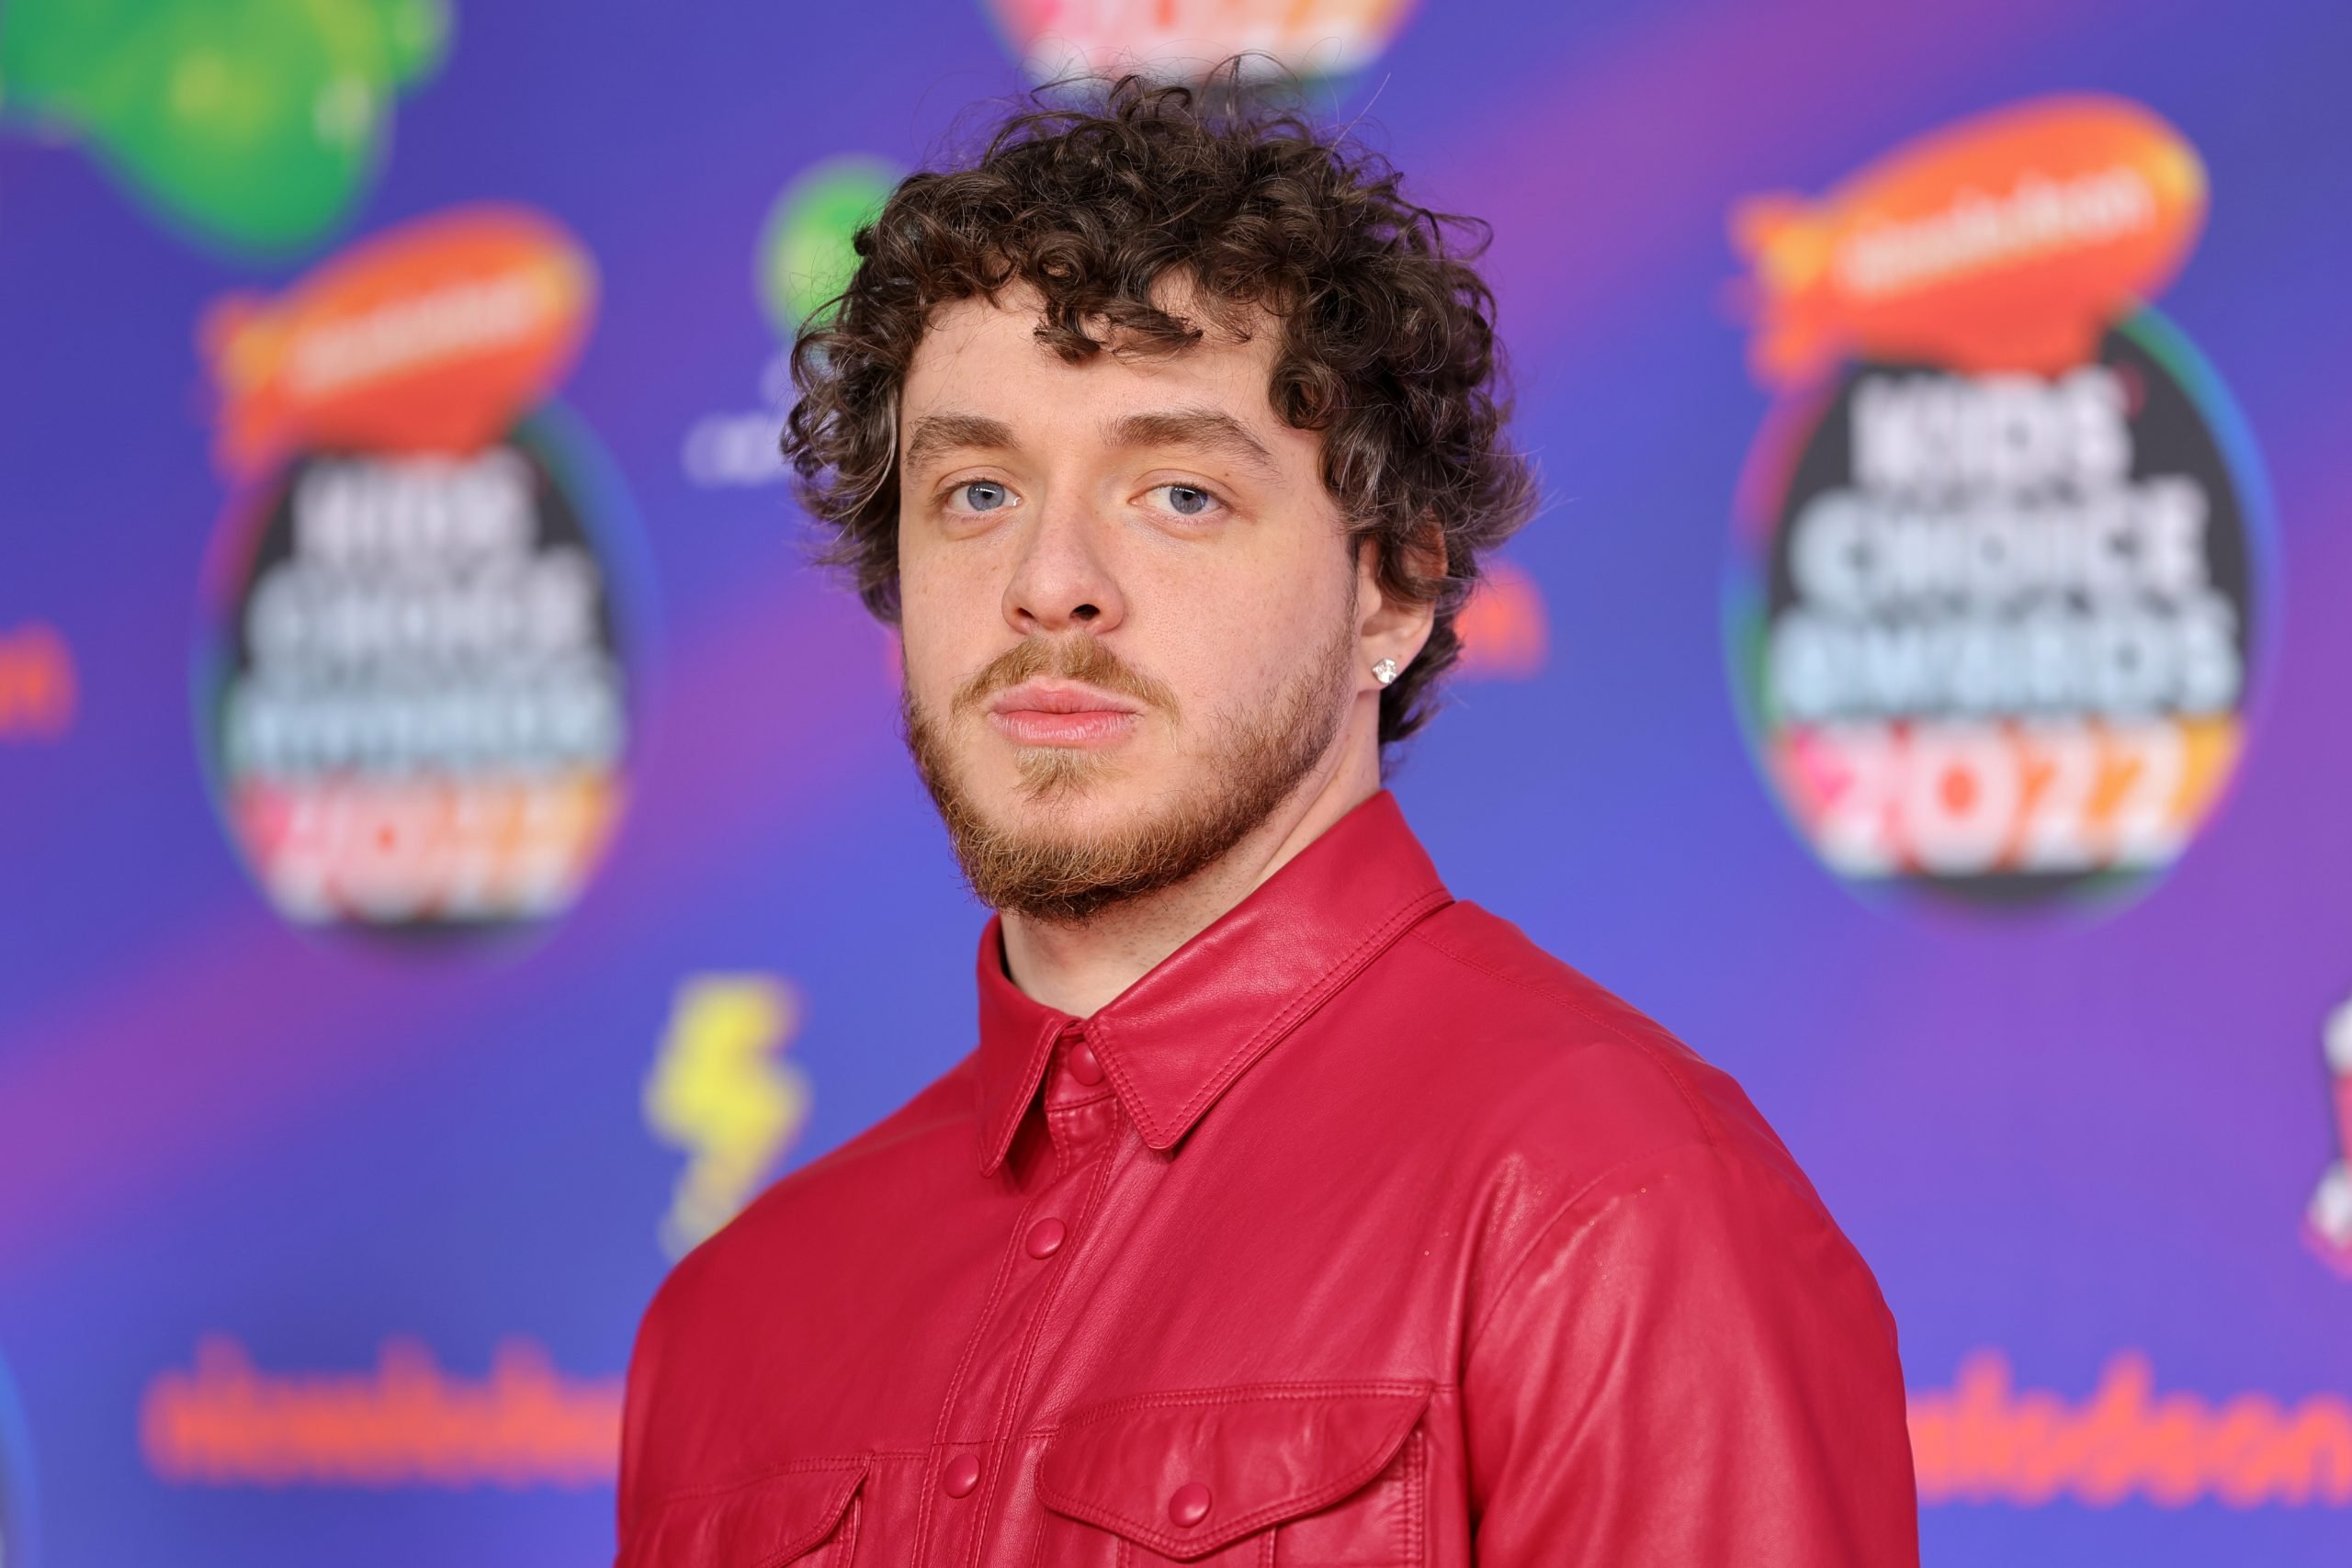 Rapper Jack Harlow poses at the Nickelodeon's Kids' Choice Awards